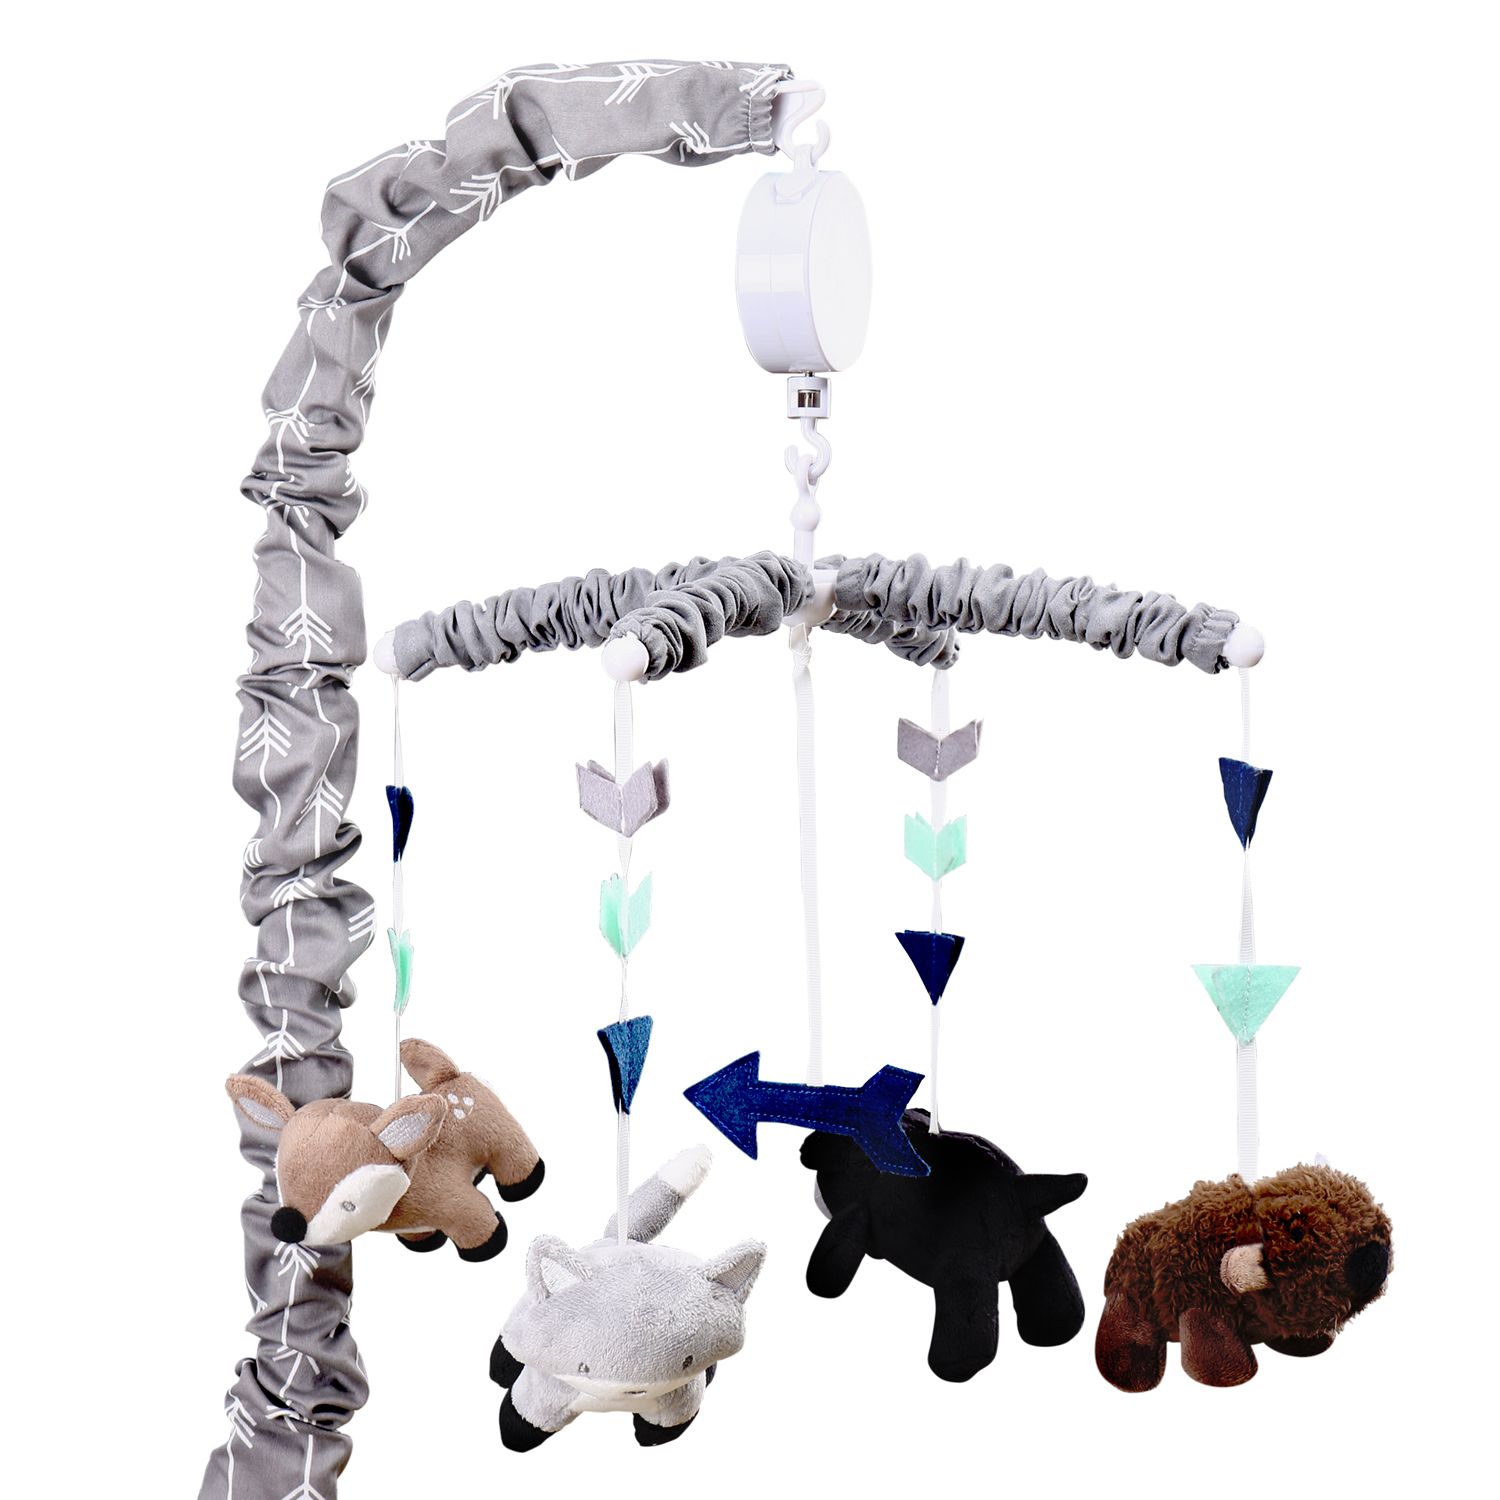 Galaxy Musical Crib Baby Mobile Mobile Trend Lab